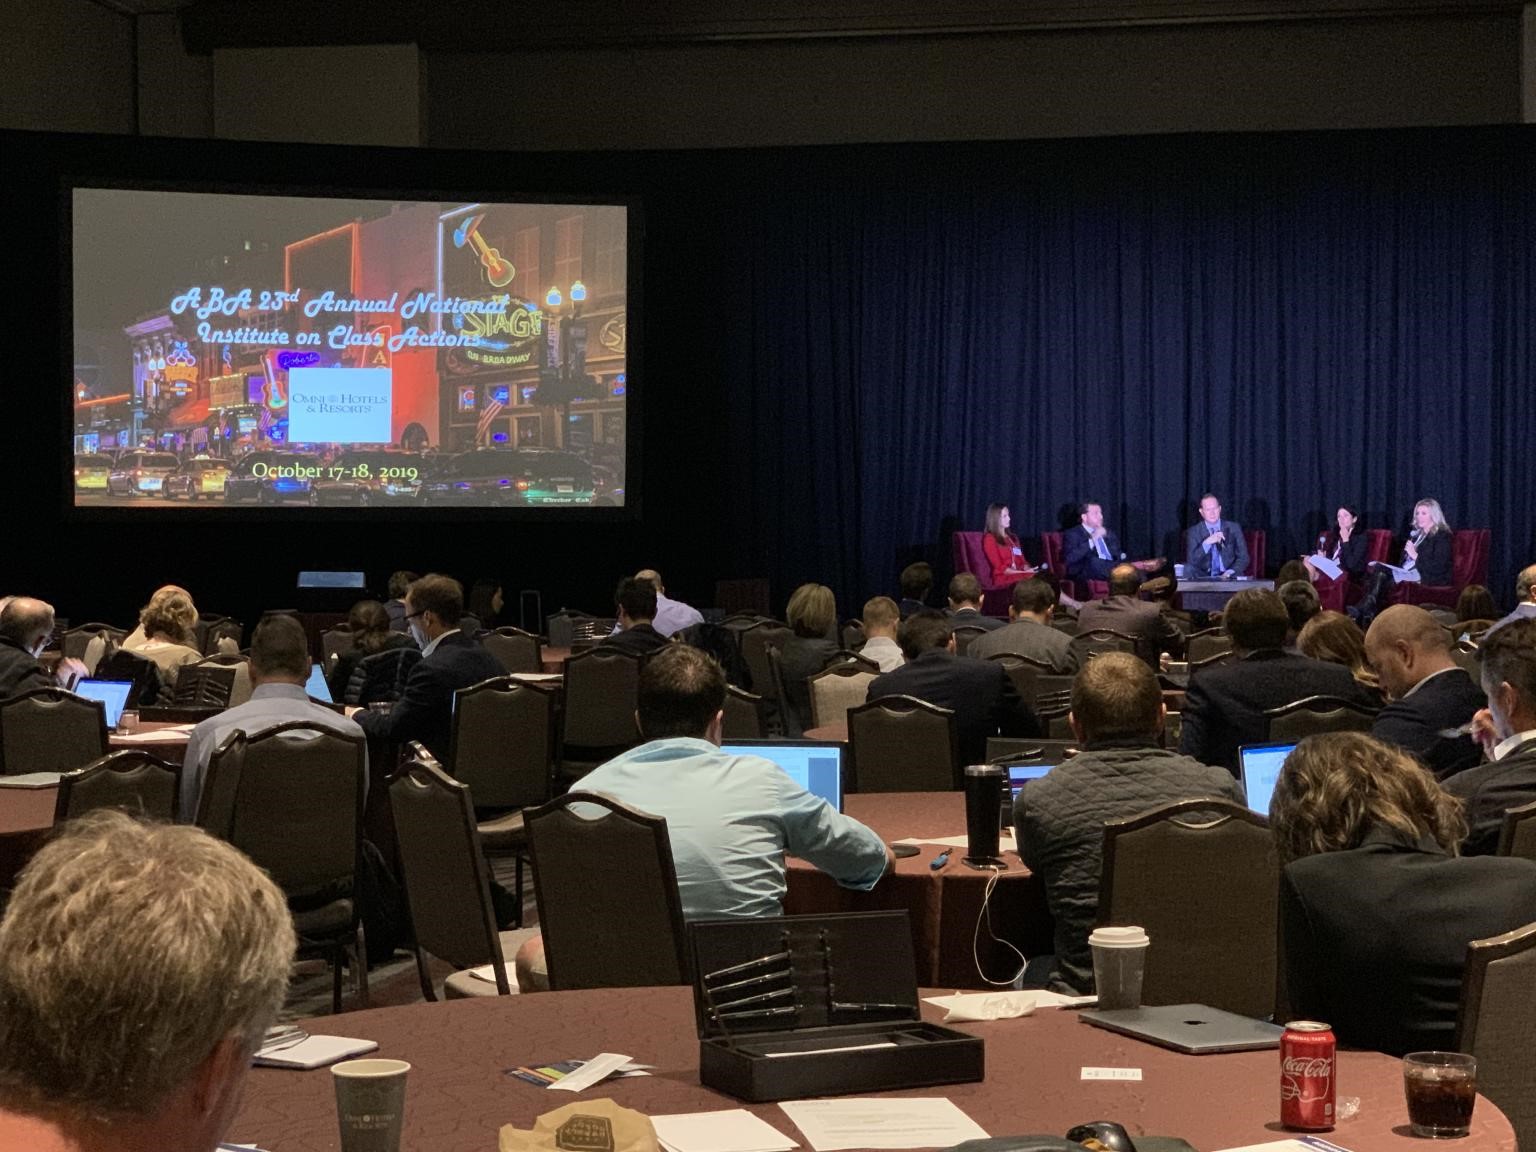 Notice and Claims Administration Panel at American Bar Association’s (ABA) 23rd Annual National Institute on Class Actions, October 17-18, 2019.